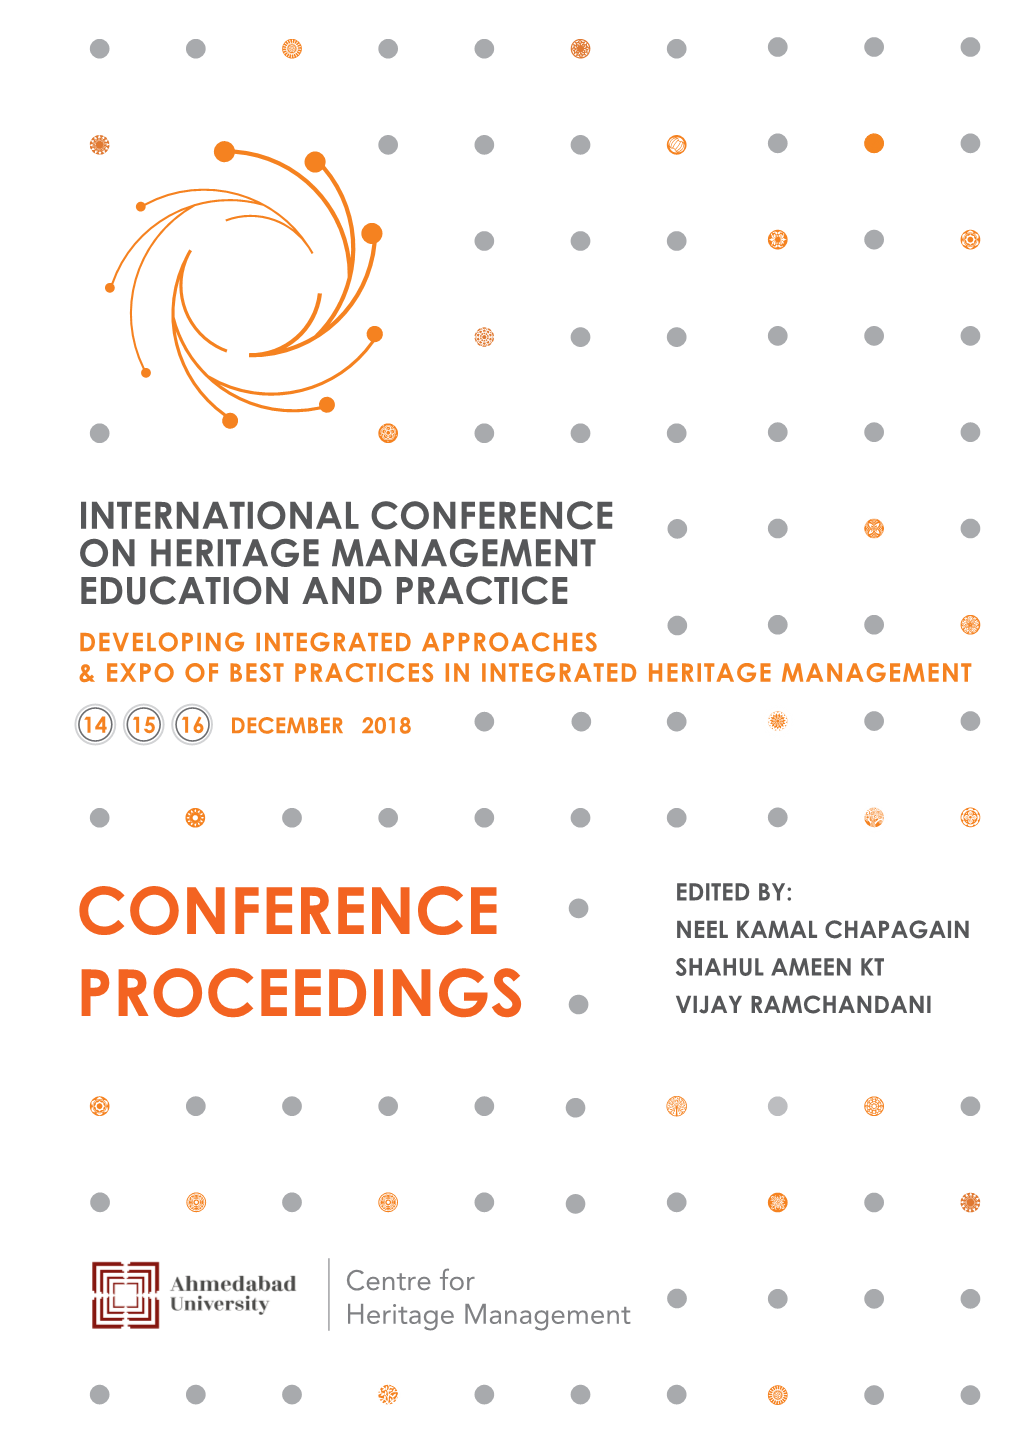 International Conference on Heritage Management Education and Practice Developing Integrated Approaches & Expo of Best Practices in Integrated Heritage Management